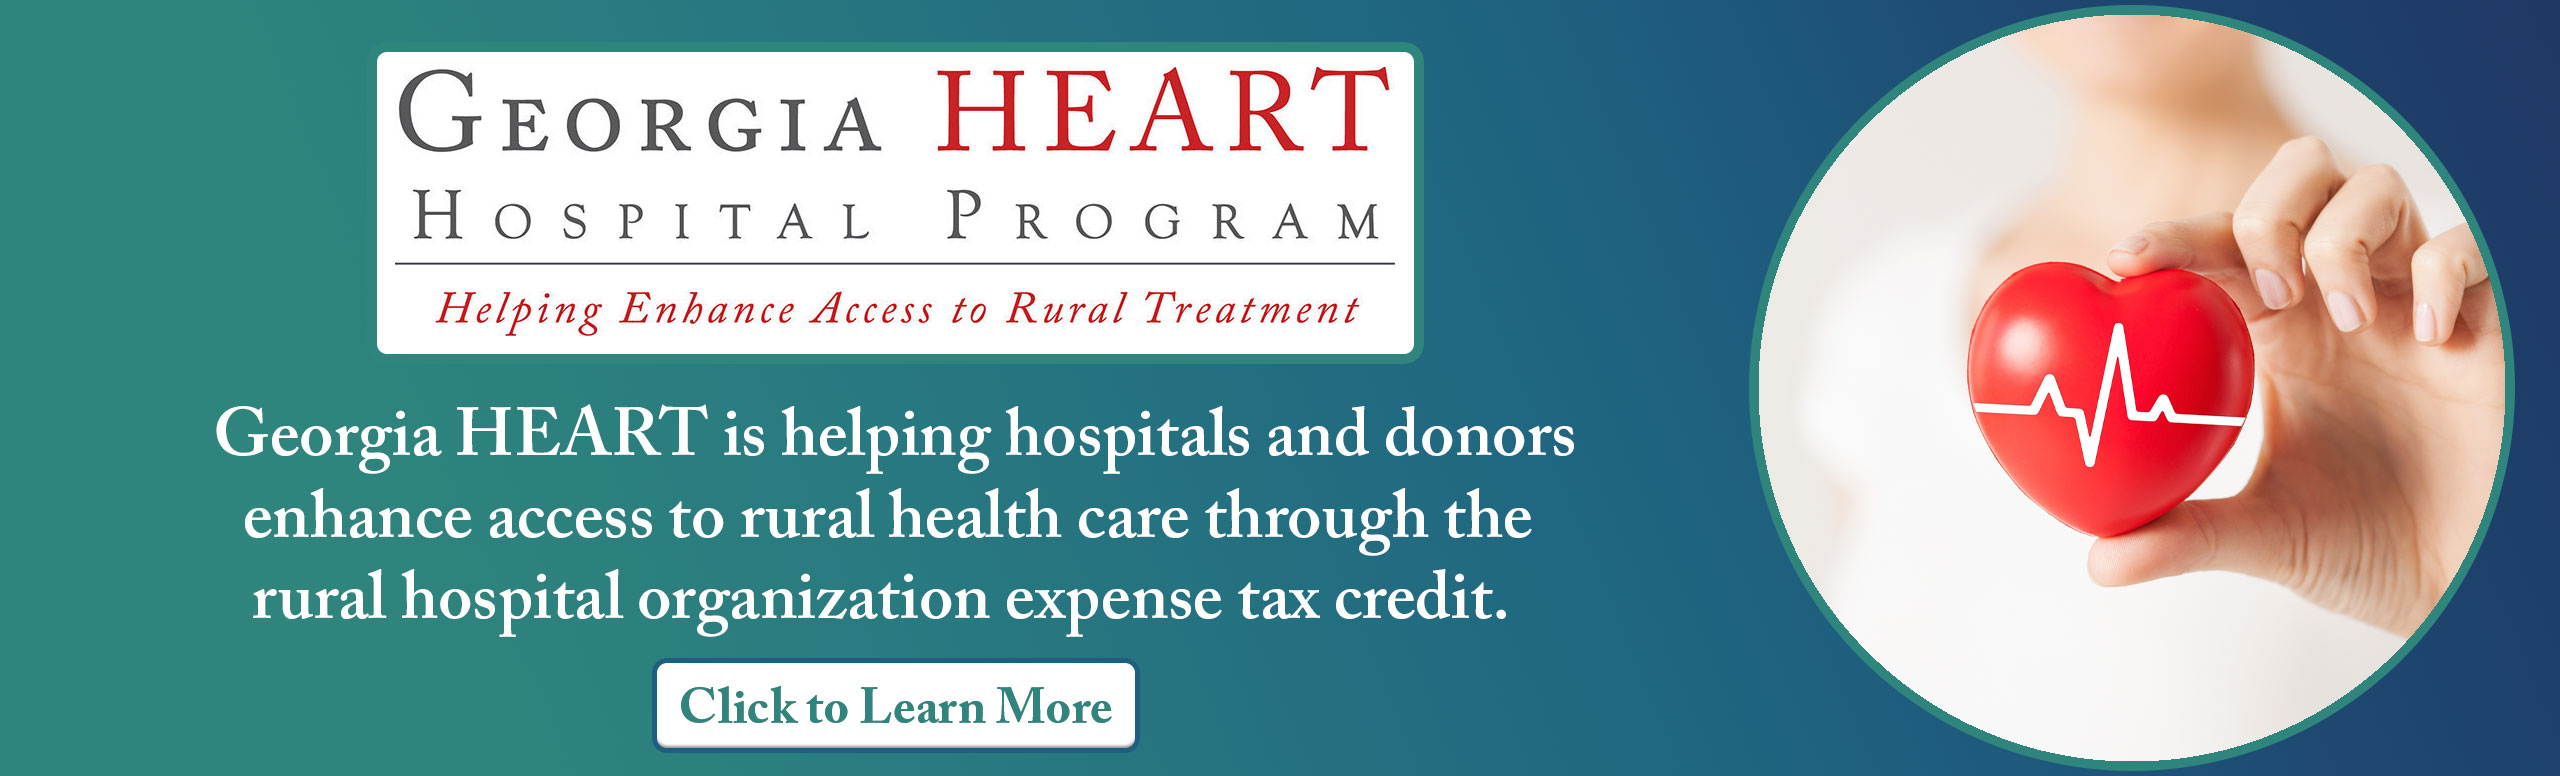 GEORGE HEART
HOSPITAL PROGRAM
Helping Enhance Access to Rural Treatment
Georgia HEART is helping hospitals and donors enhance access to rural health care through the rural hospital organization expense tax credit. 
(Click to Learn More)